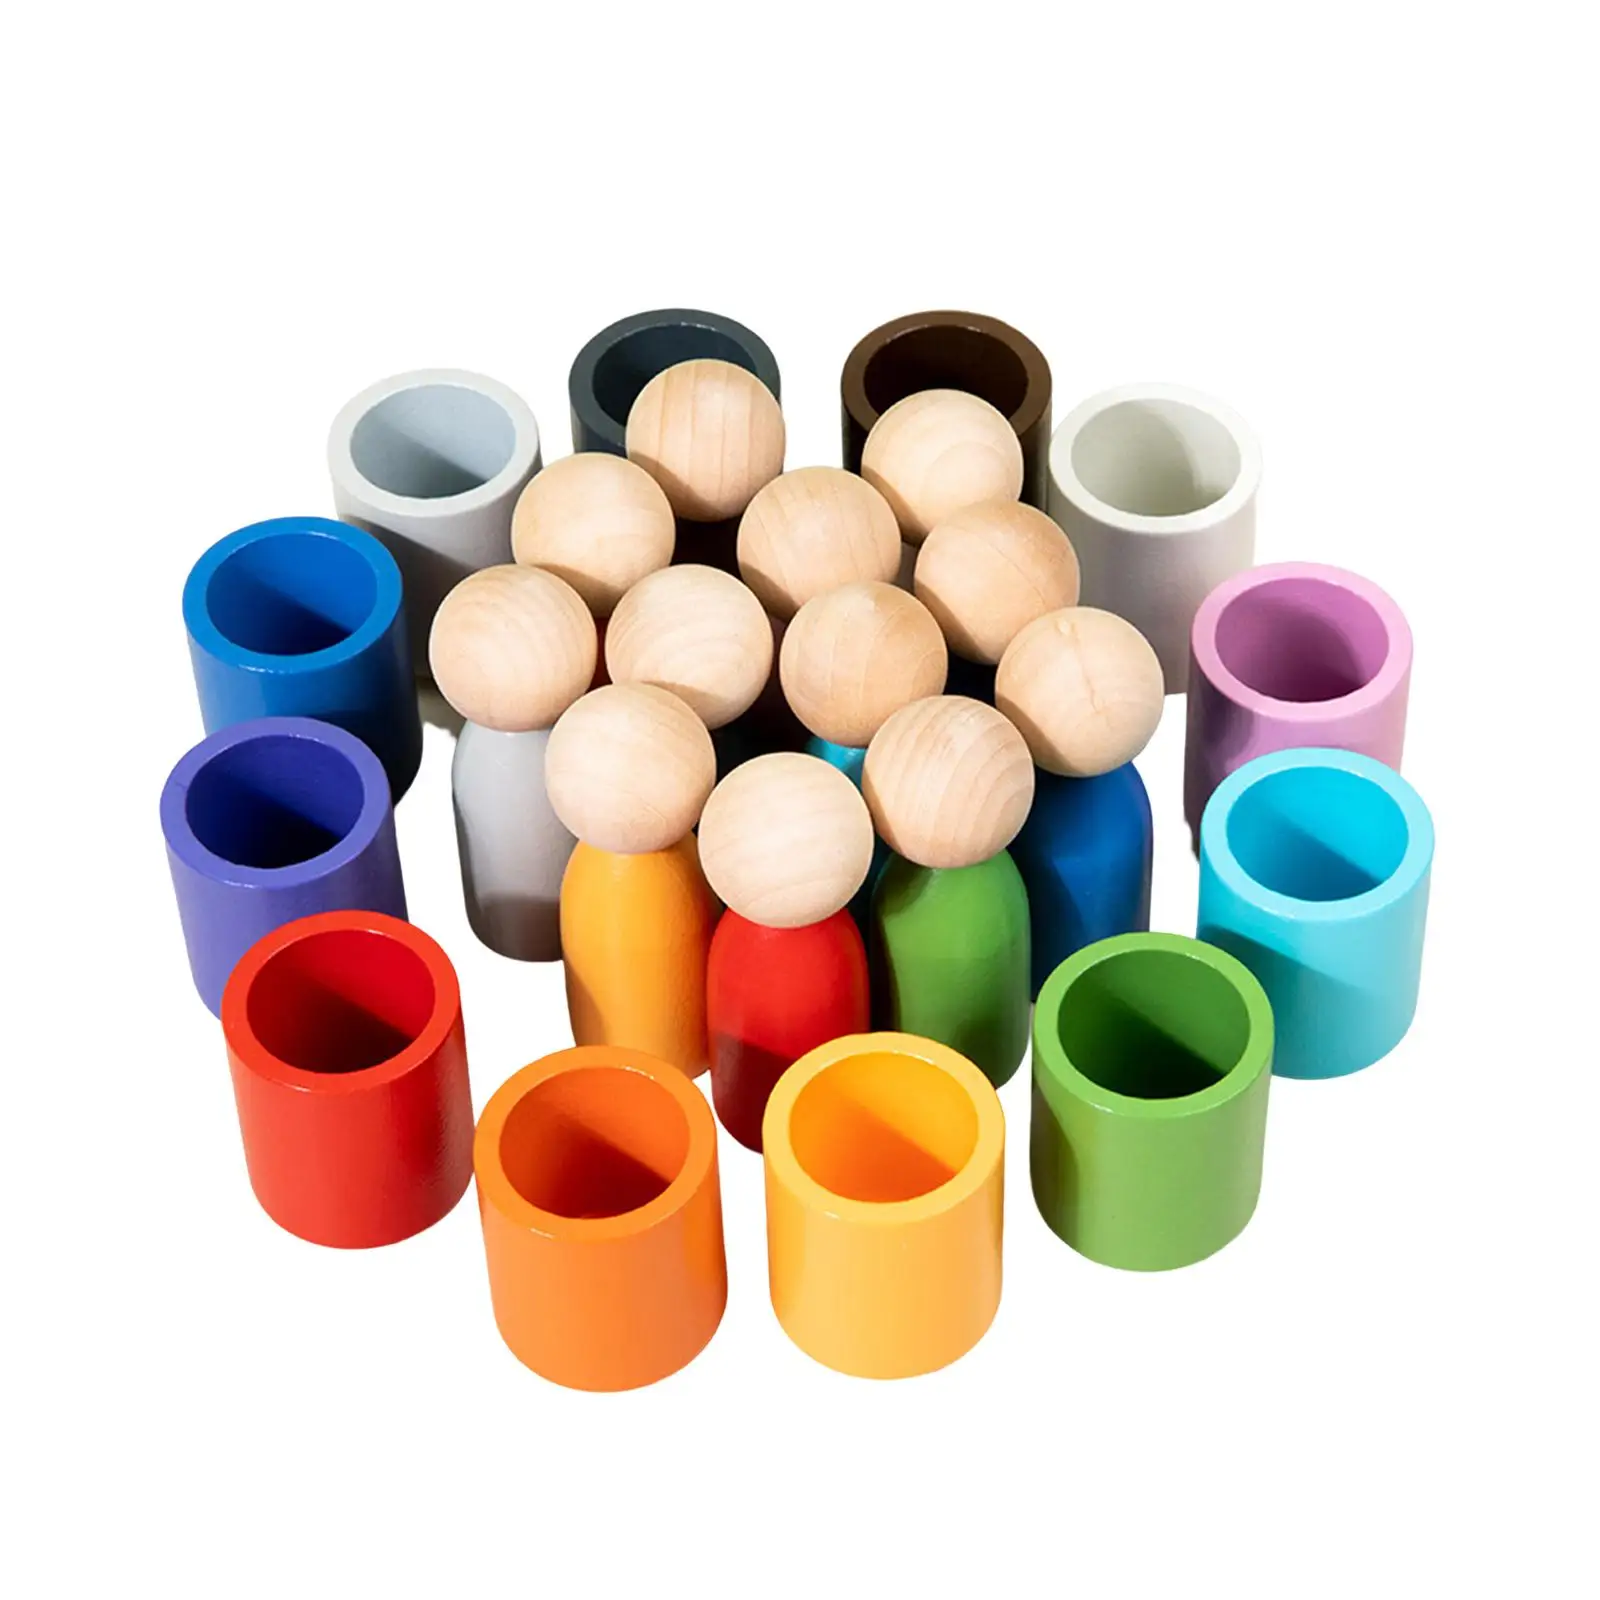 Wooden Peg Dolls in Cups Color Sorting Game Early Education Toys Balls in Cups Montessori Toy for Girls Kids Boys Birthday Gifts